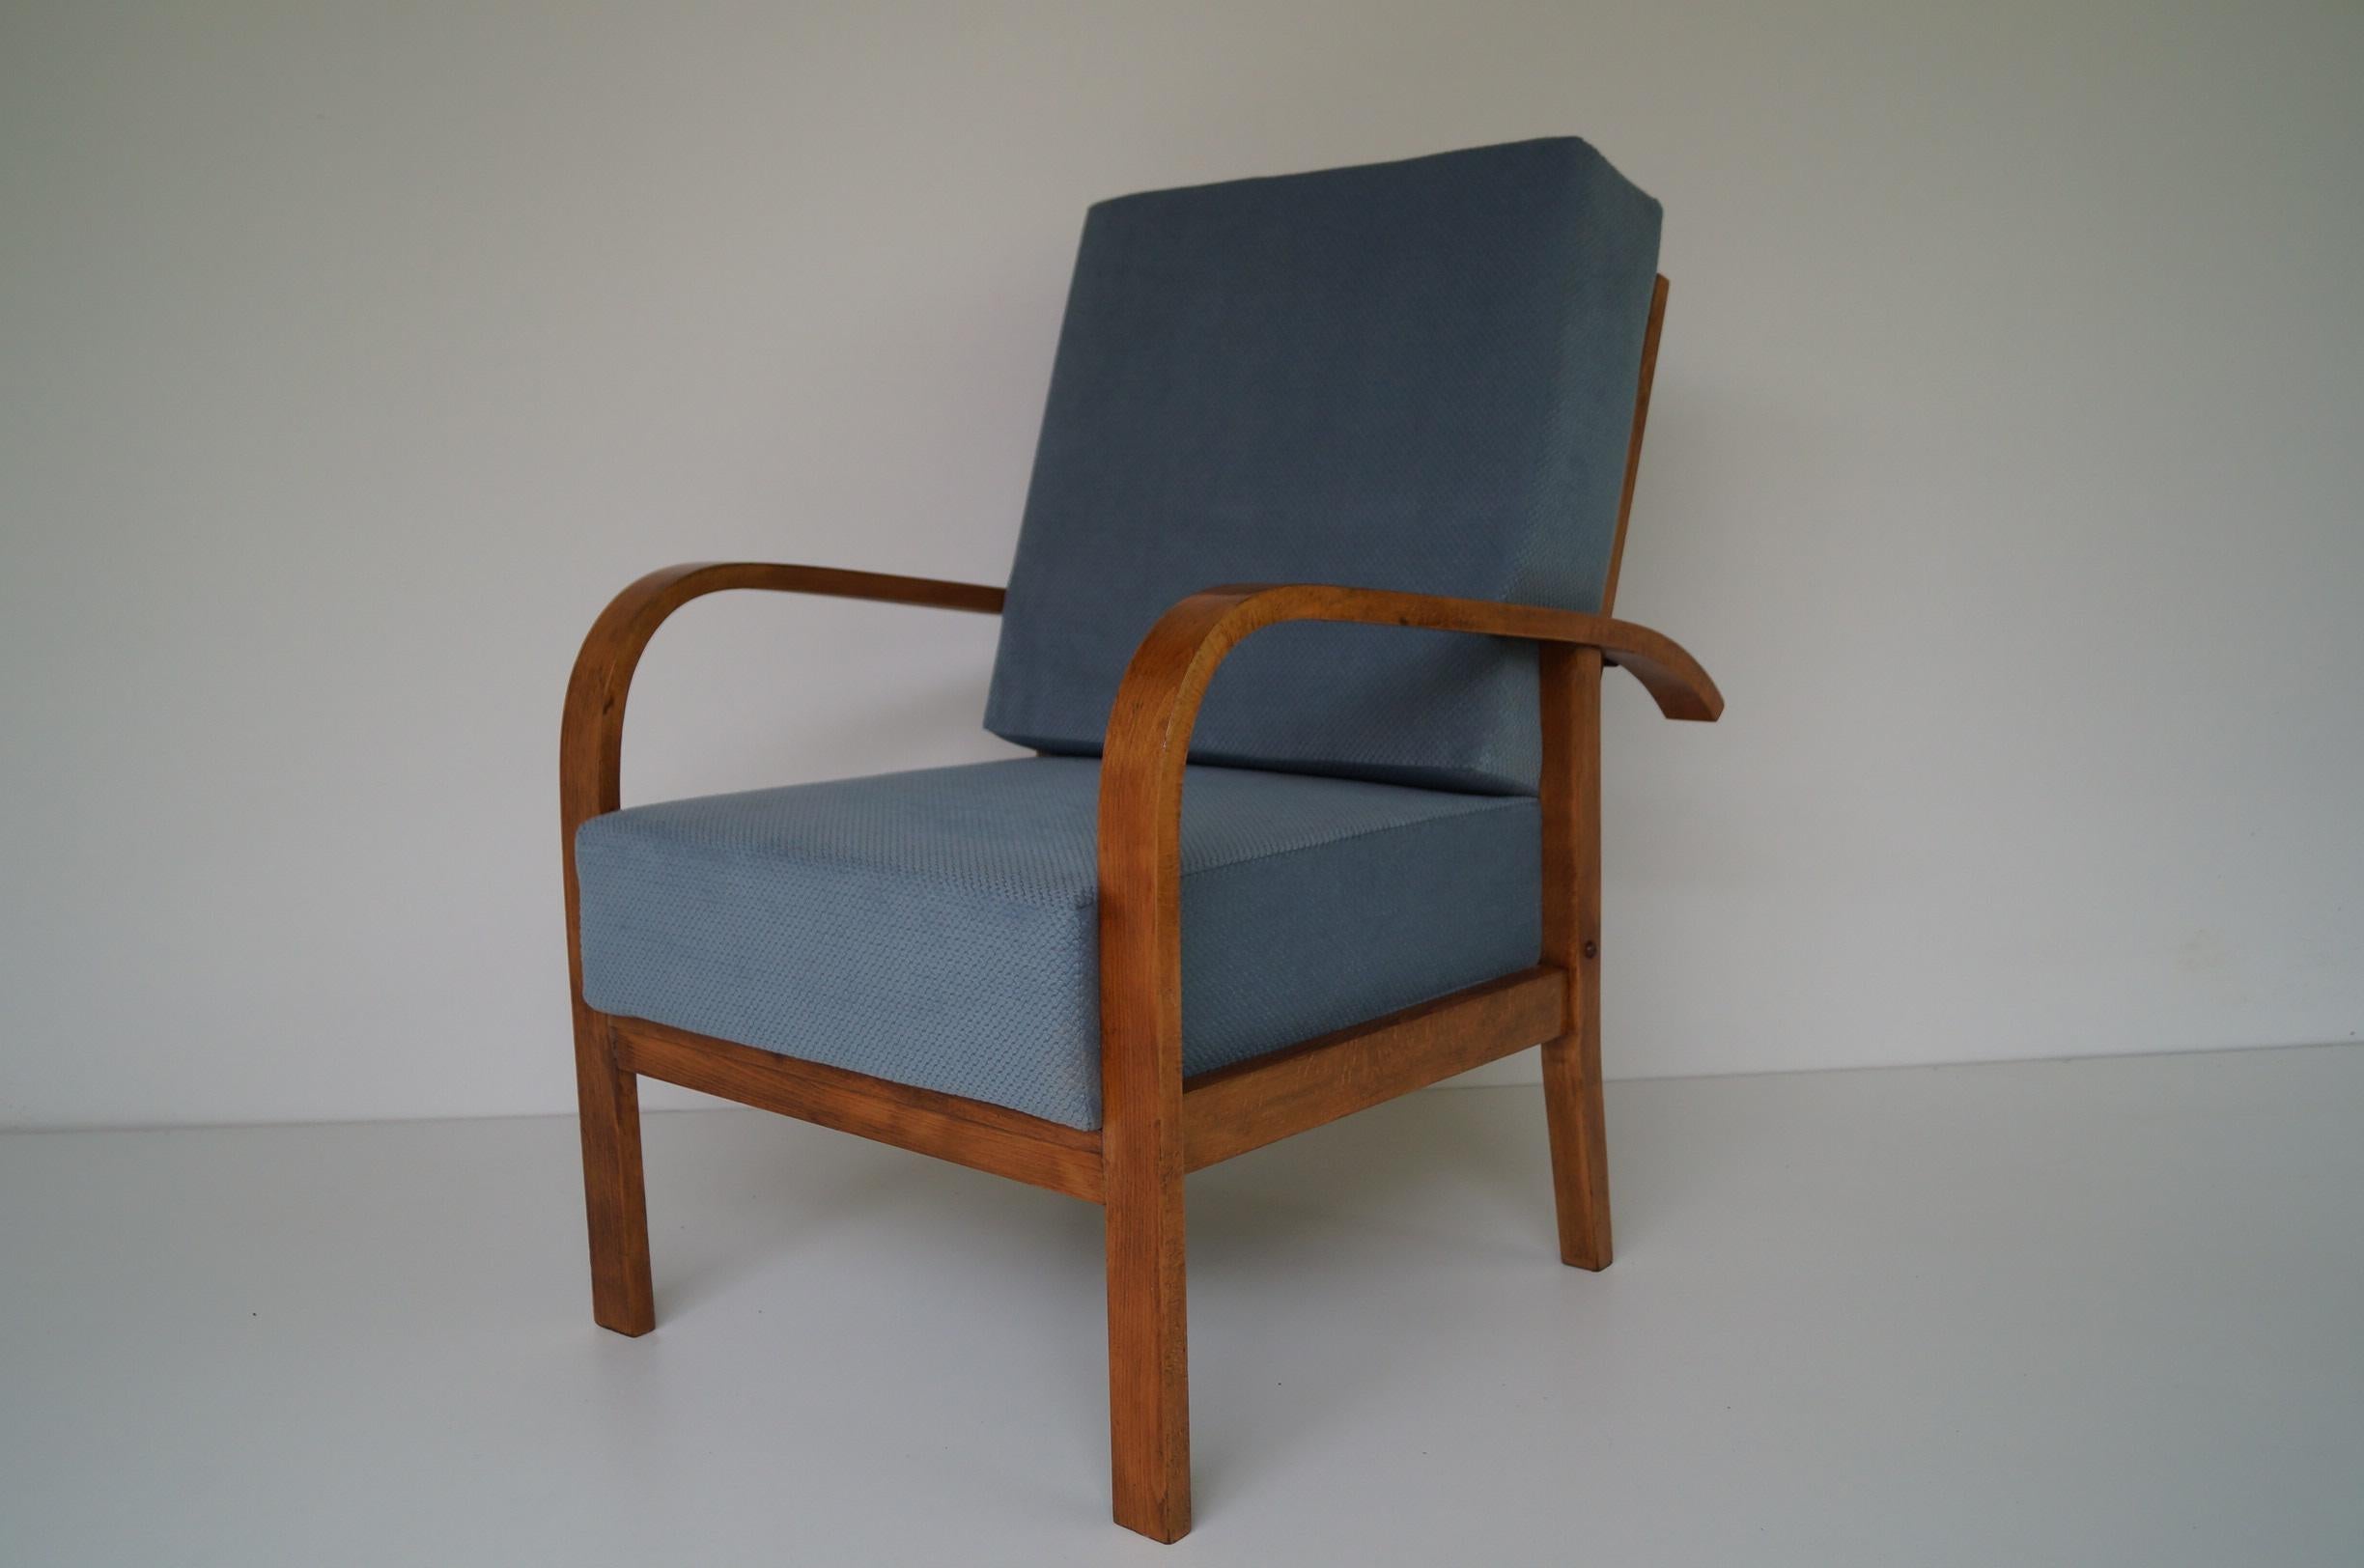 Art Deco armchair from 1950
Every piece of furniture that leaves our workshop from the beginning to the end is subjected to manual renovation, so as to restore its original condition from many years ago (It has been cleaned to bare veneer,